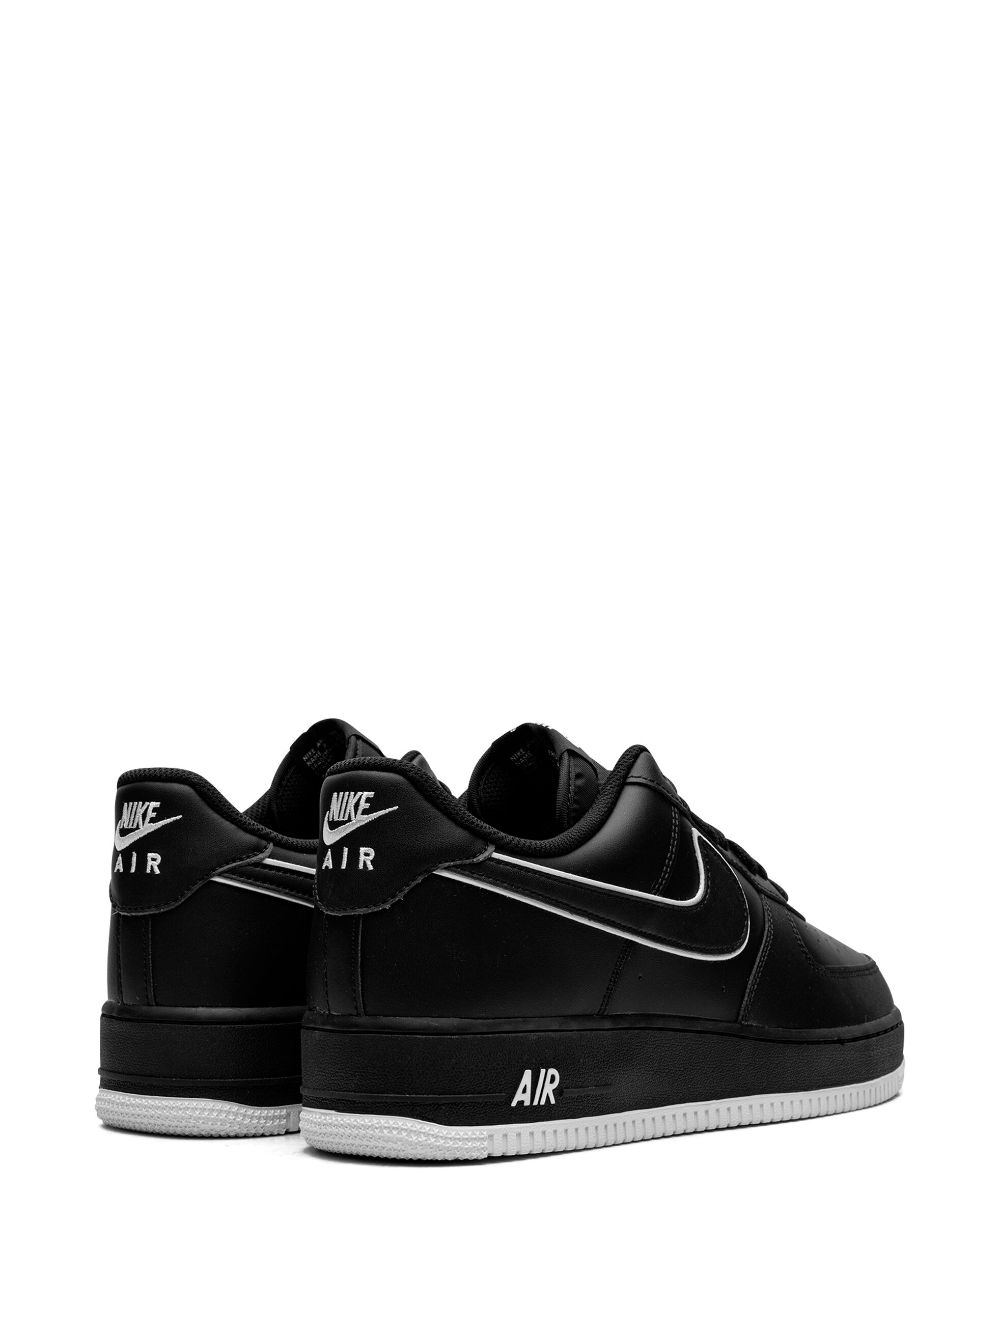 Shop Nike Air Force 1 Low "black/white" Sneakers